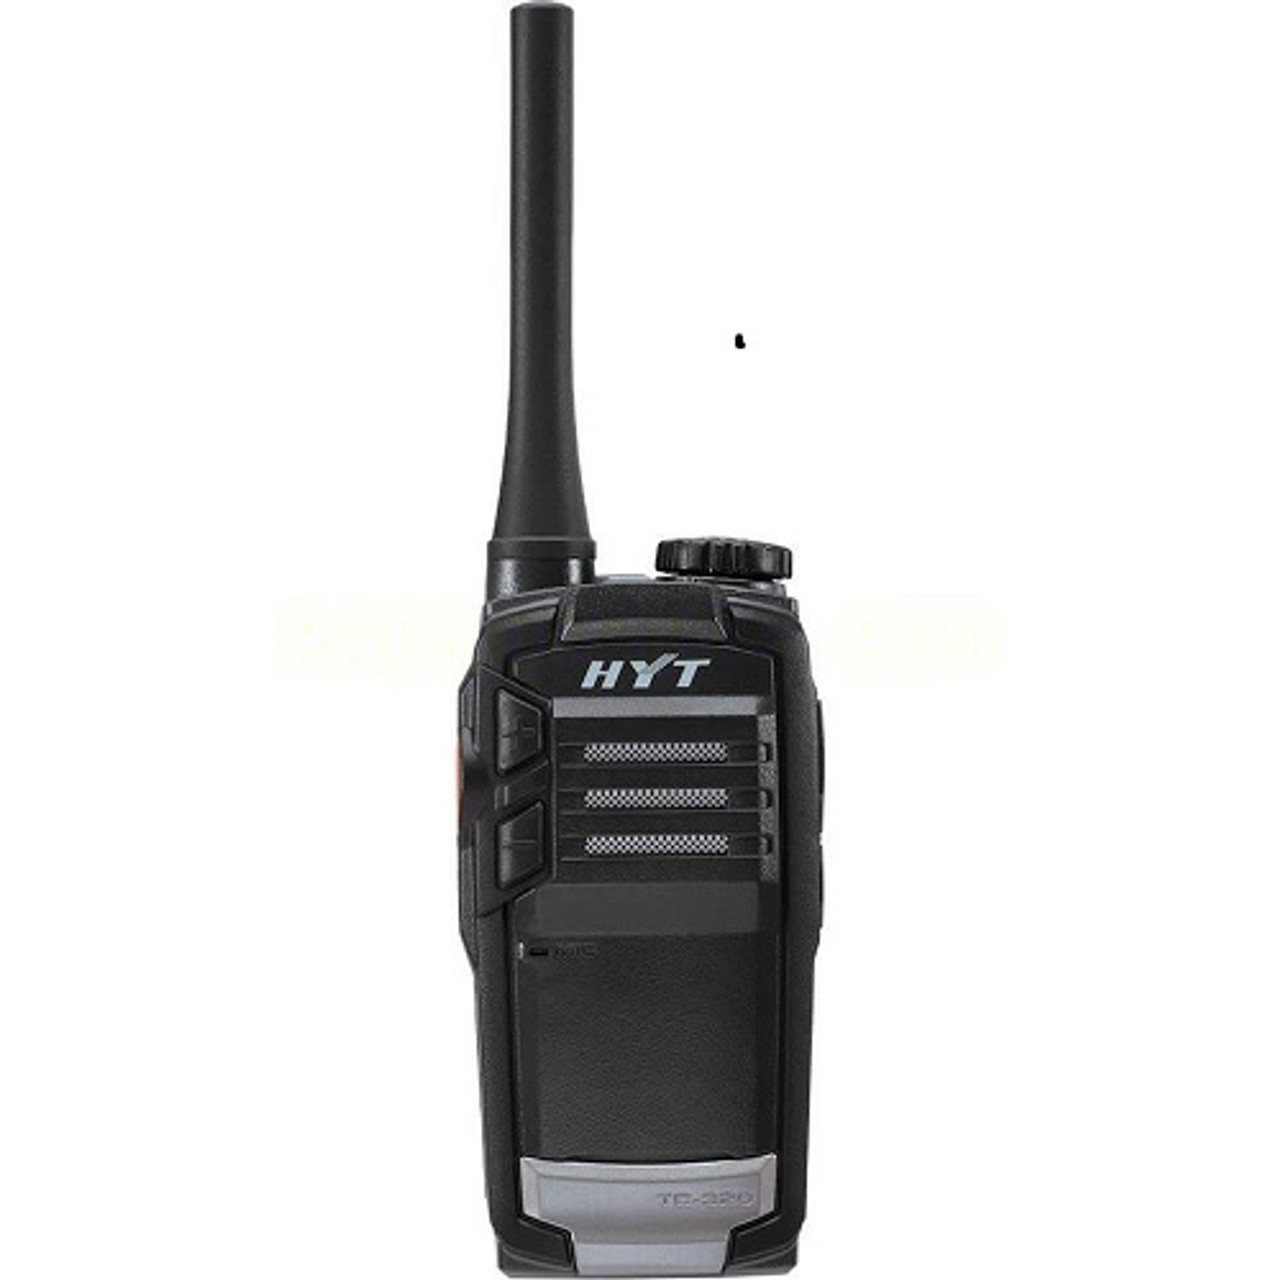 NEW HYT TC320 16CH 400-470MHZ RADIO COMPACT BUSINESS WAREHOUSE RETAIL BAR OFFICE 